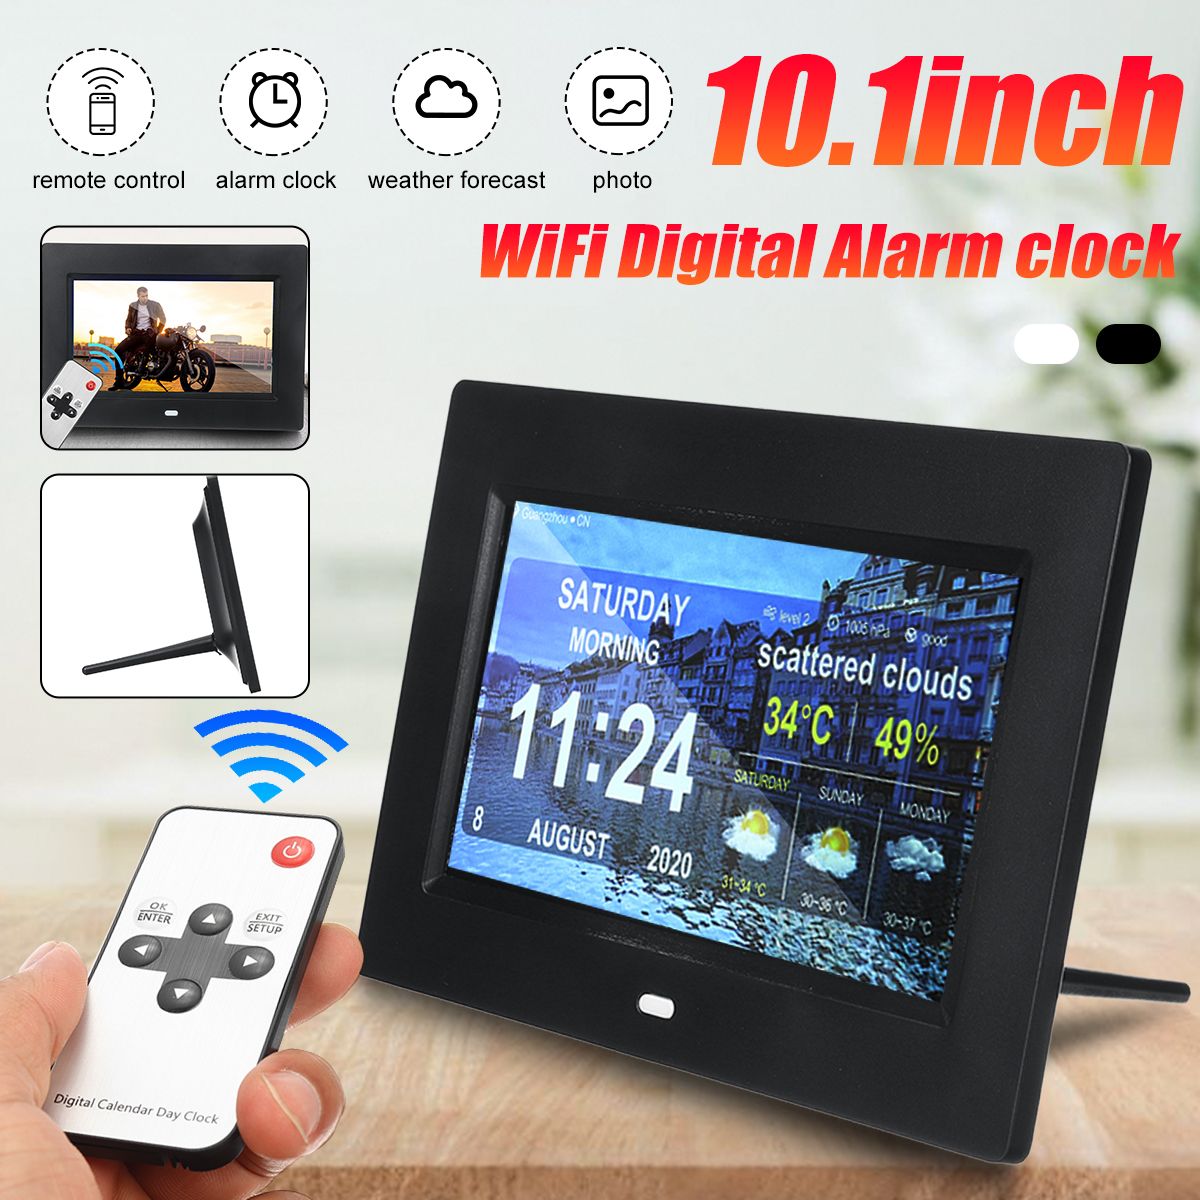 101-inch-WiFi-Digital-Photo-Frame-Alarm-Clock-Time-Date-Month-Year-Weather-Forecast-Clock-1739151